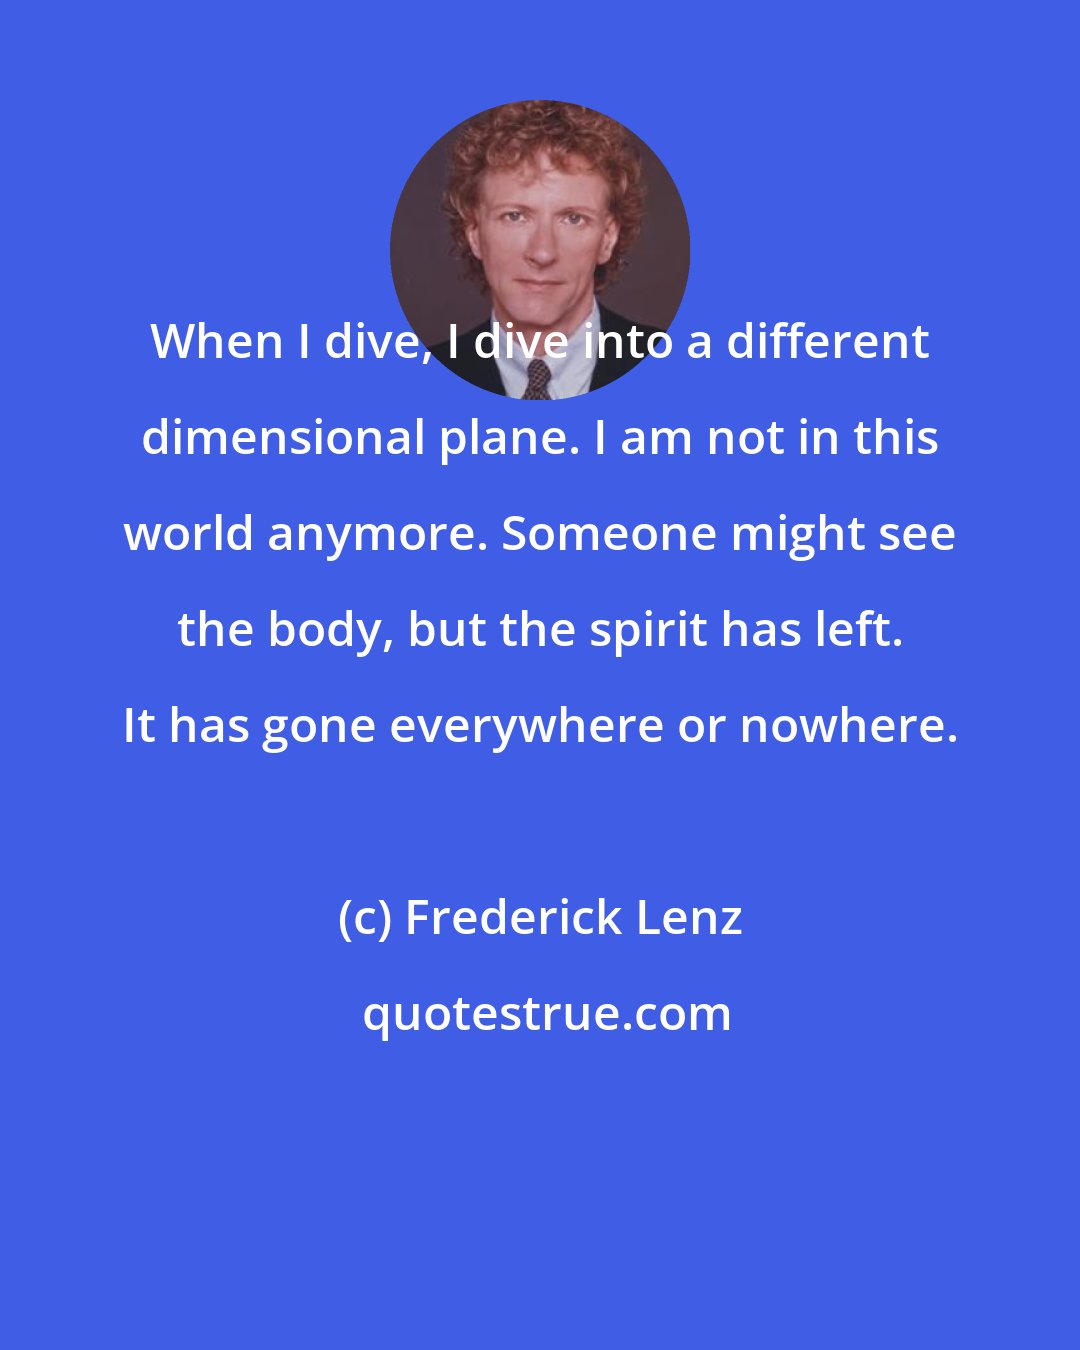 Frederick Lenz: When I dive, I dive into a different dimensional plane. I am not in this world anymore. Someone might see the body, but the spirit has left. It has gone everywhere or nowhere.